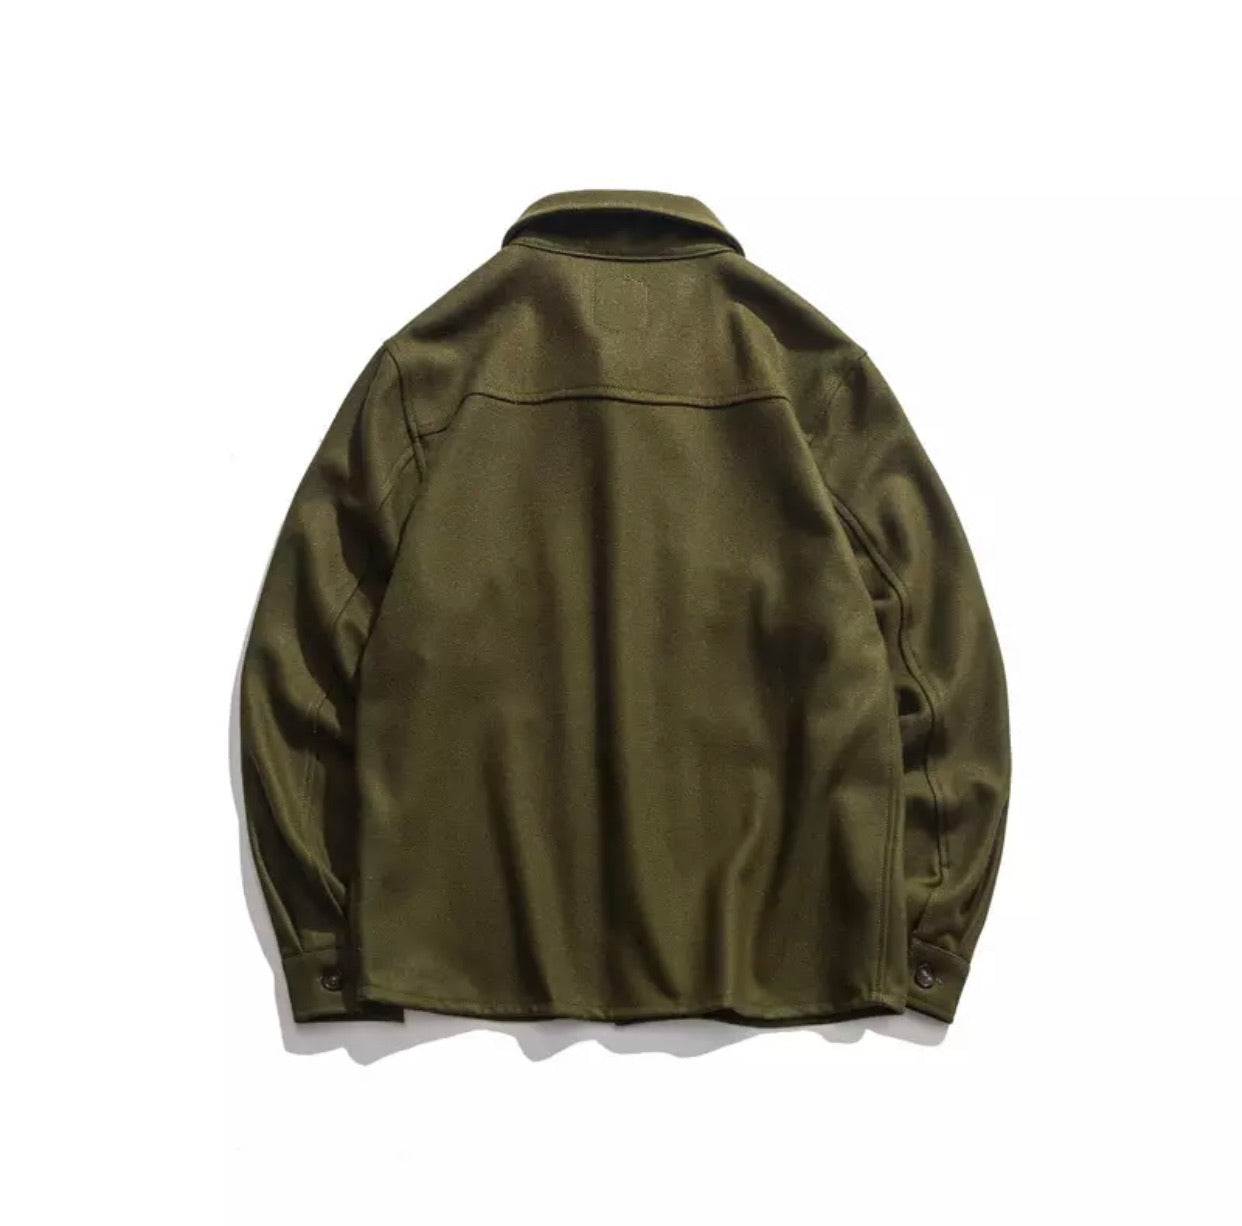 The Olive Wool Shacket - Up to Size XXXL